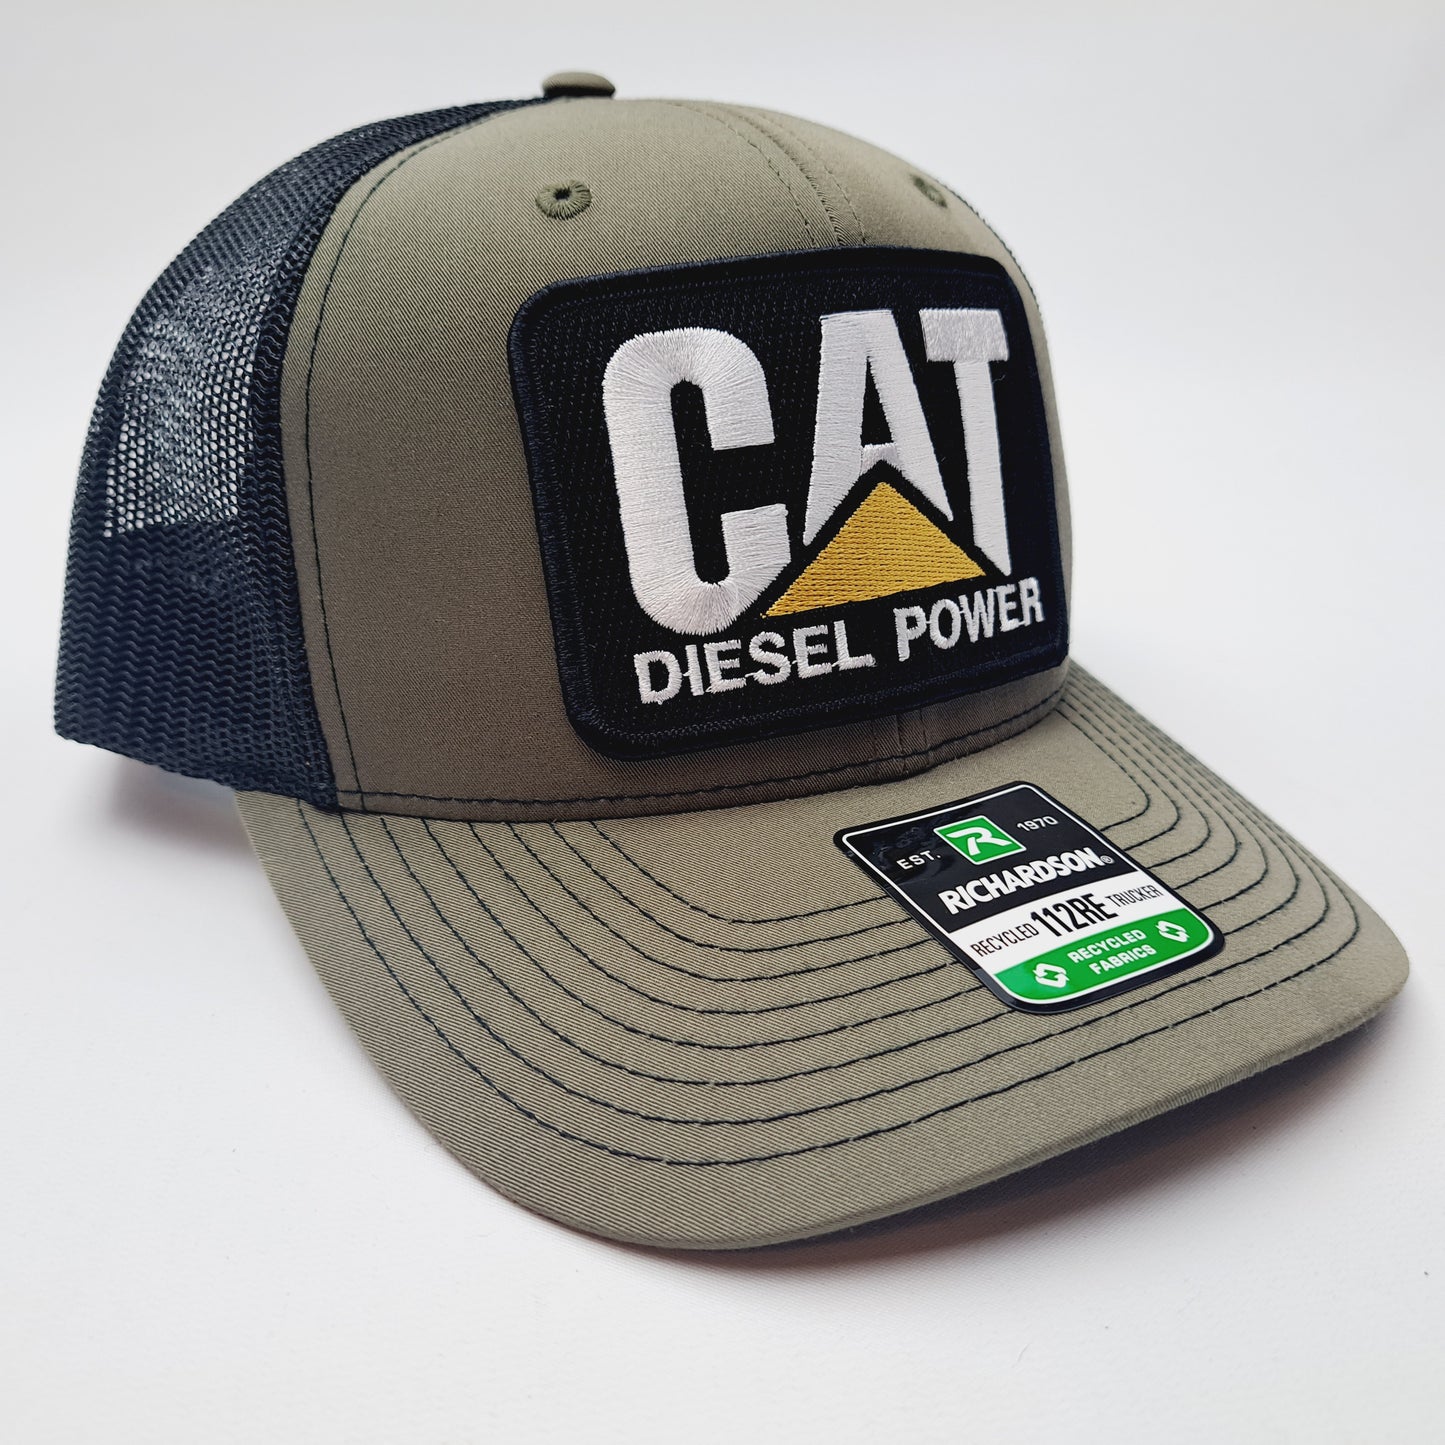 CAT Diesel Power Embroidered Patch Richardson 112RE Curved Bill Trucker Mesh Snapback Cap Hat Black